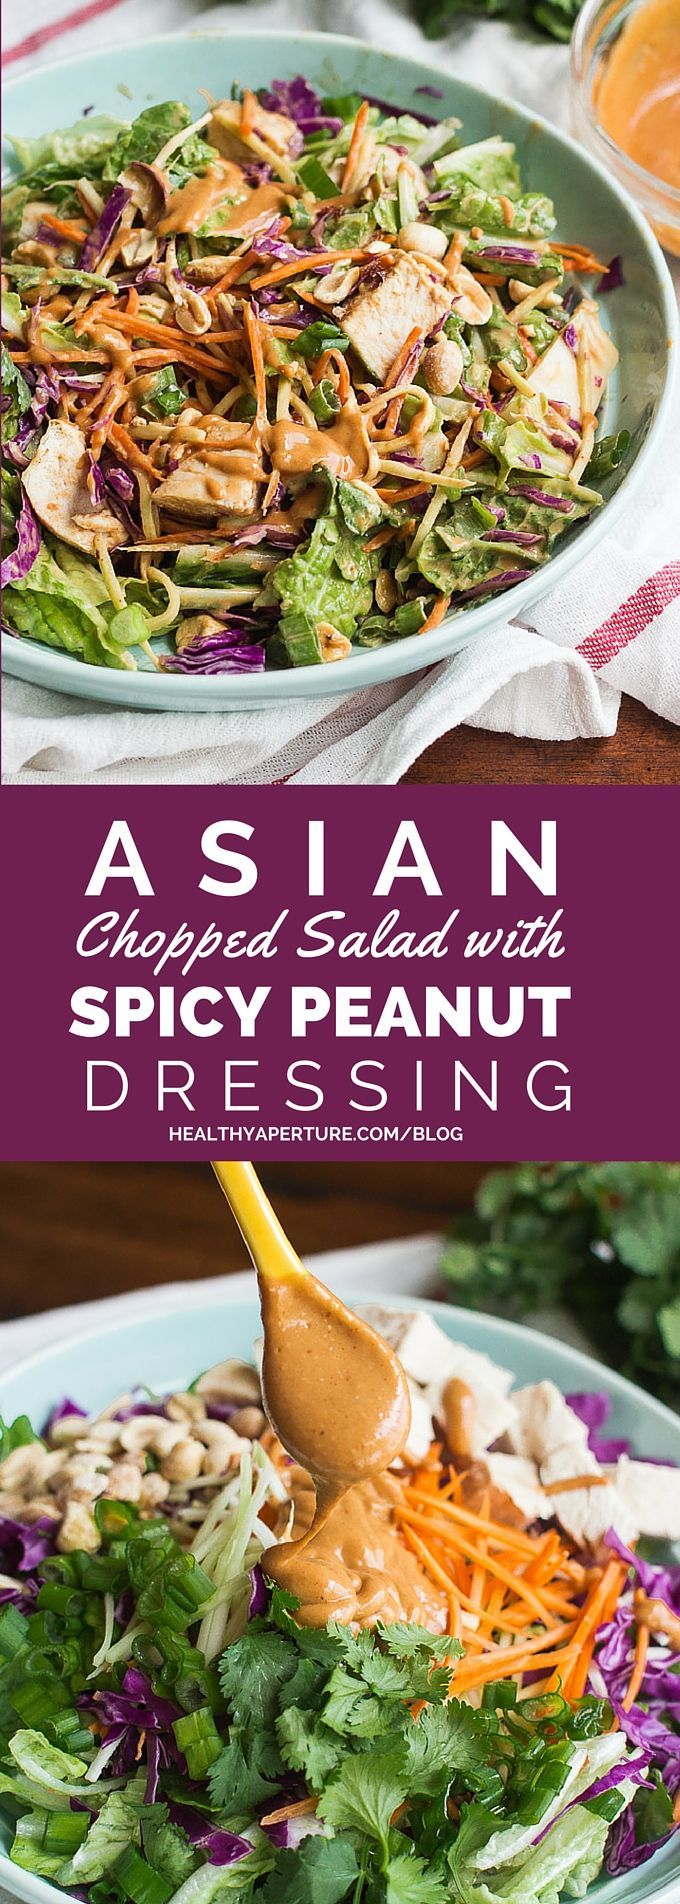 This flavorful Asian Chopped Salad with Spicy Peanut Dressing can be made ahead of time and enjoyed for lunch all week long!